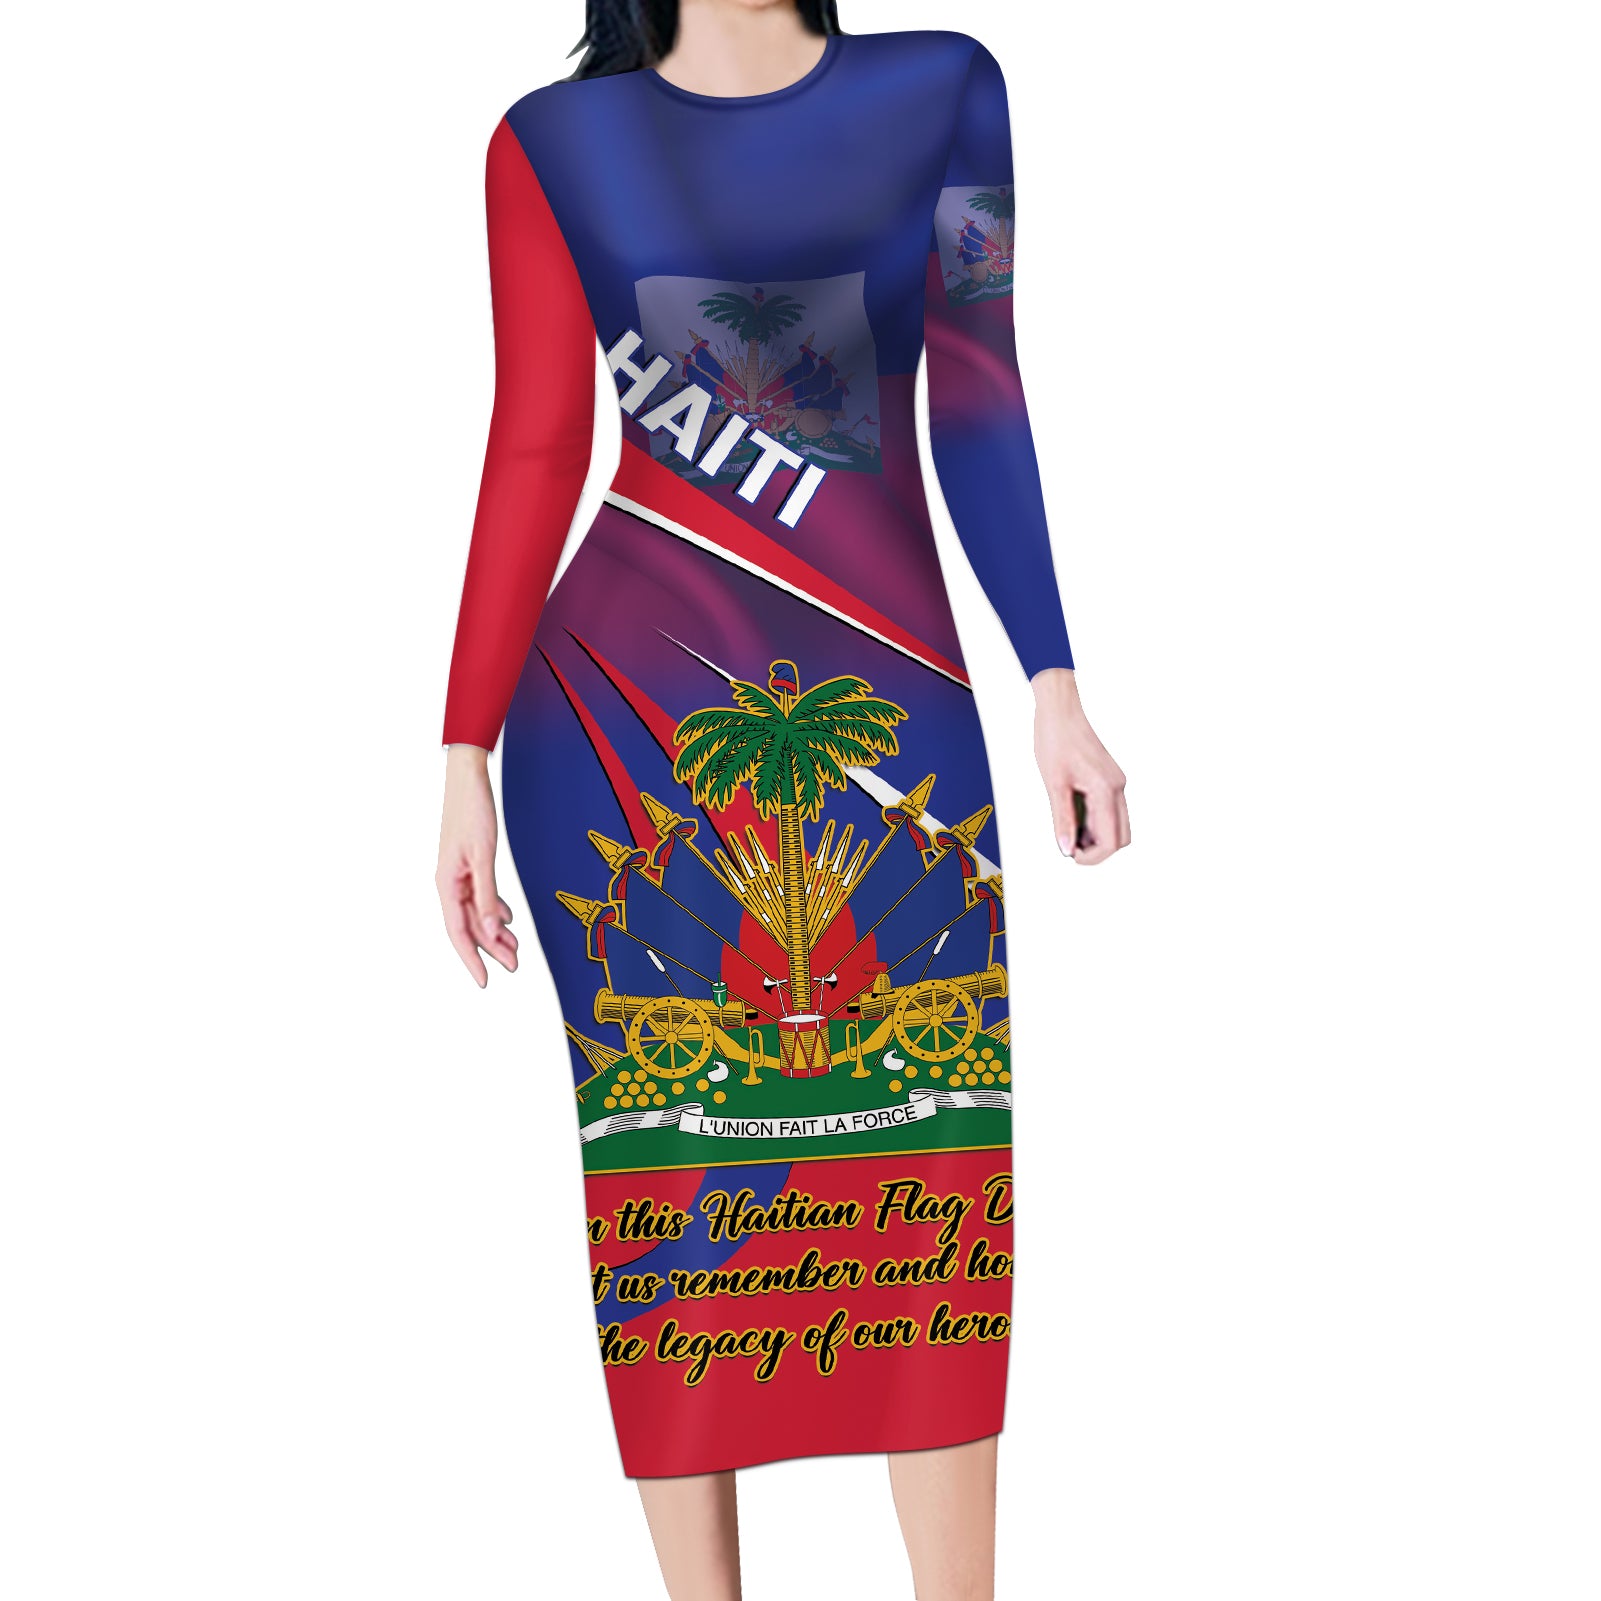 Personalised Haiti Flag Day Long Sleeve Bodycon Dress Lest Us Remember Our Heroes